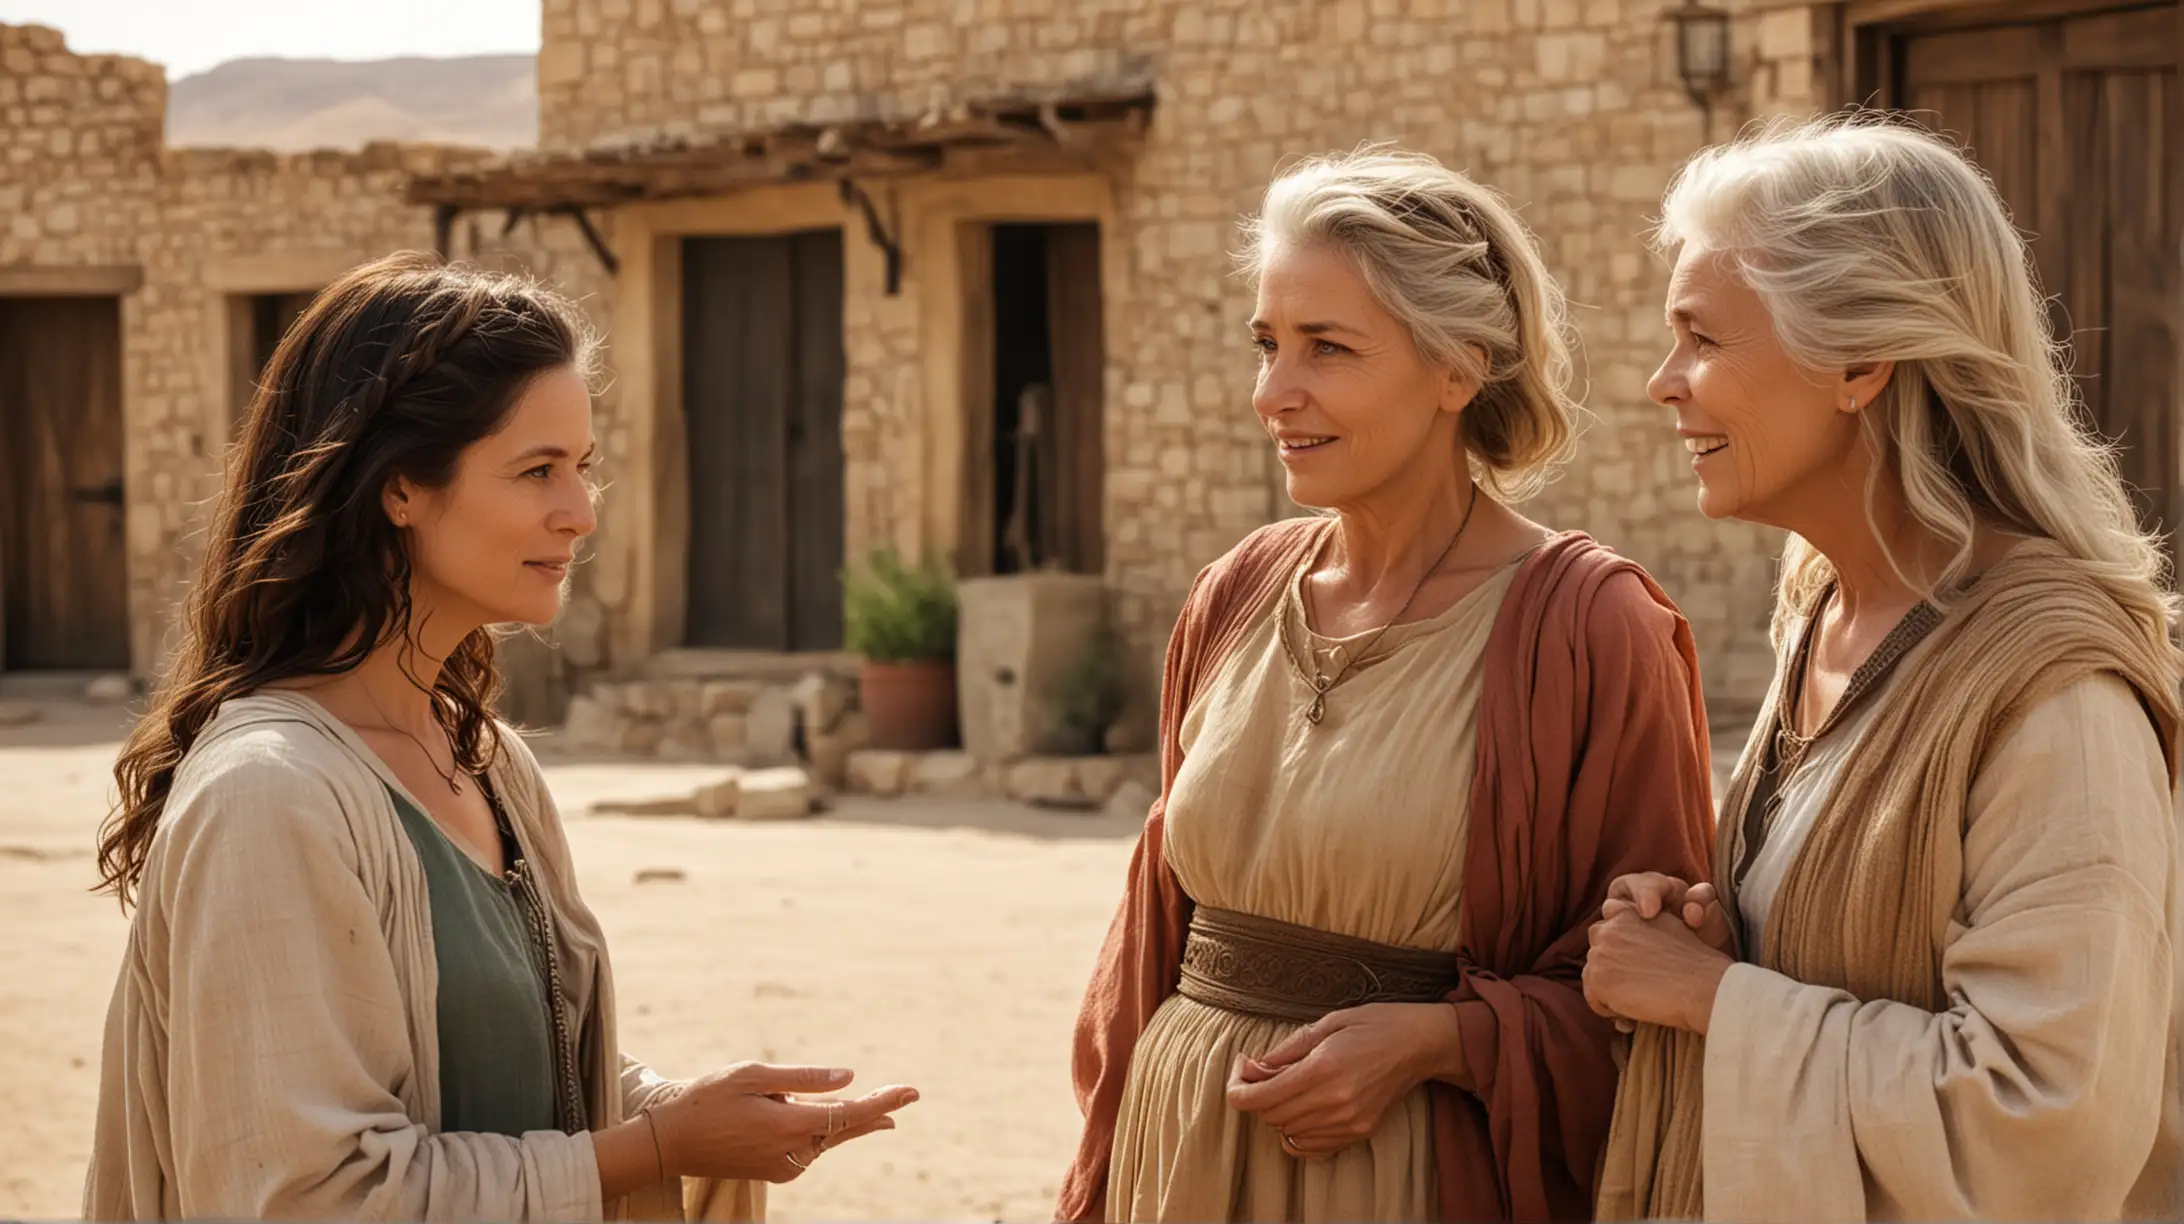 2 attractive women, talking to an older lady. Set in a Desert town, During the Biblical era of Joshua.